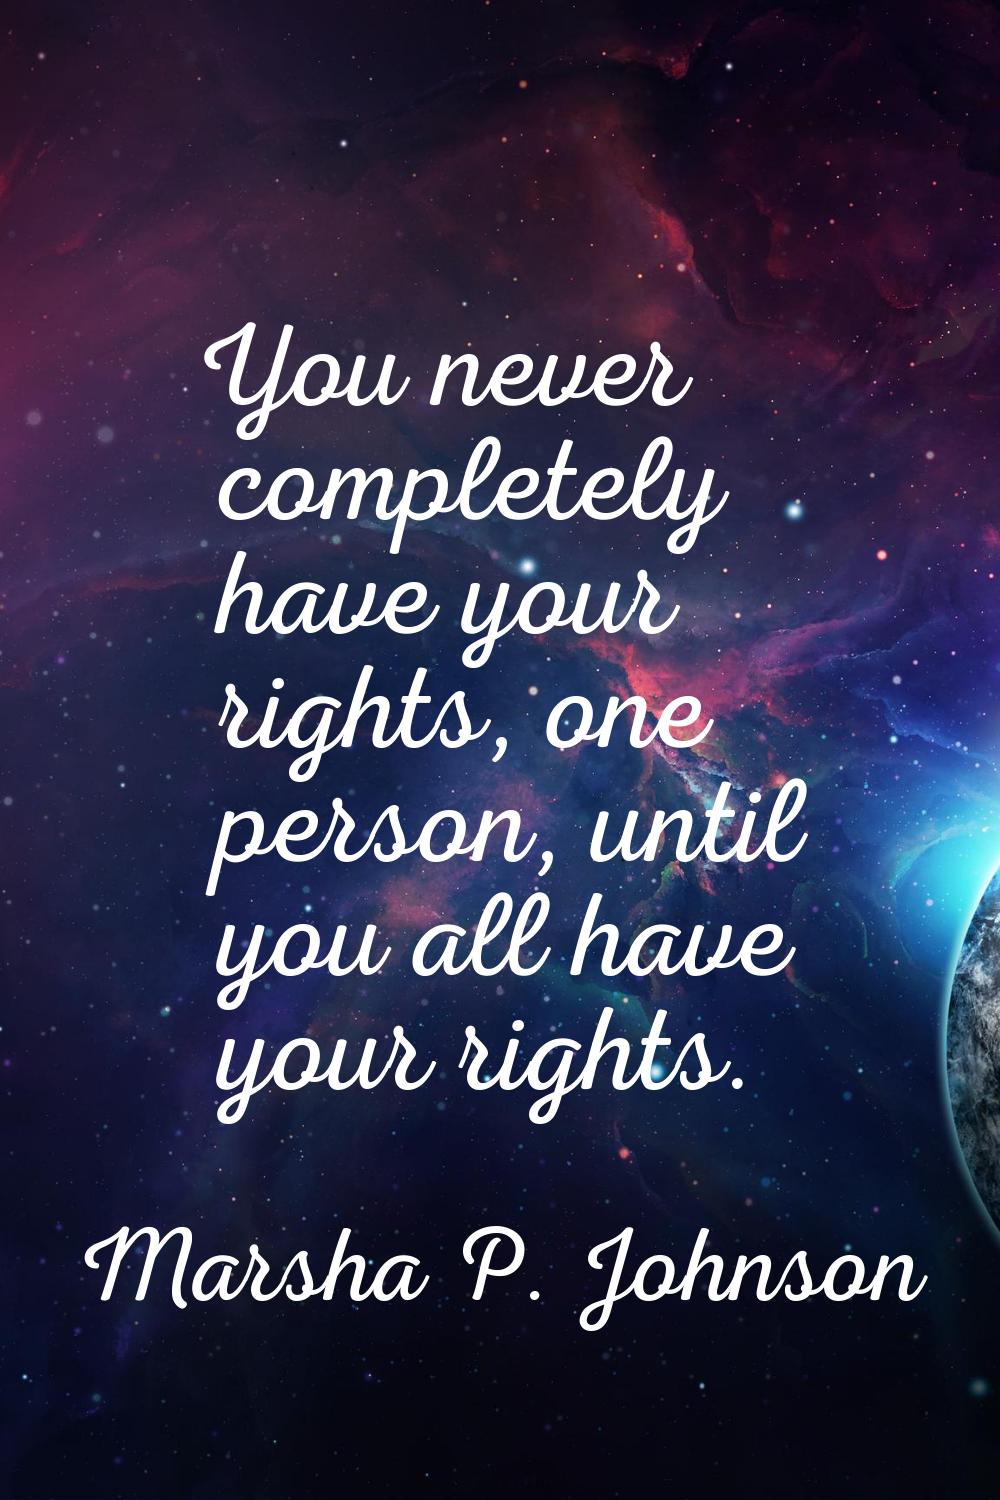 You never completely have your rights, one person, until you all have your rights.